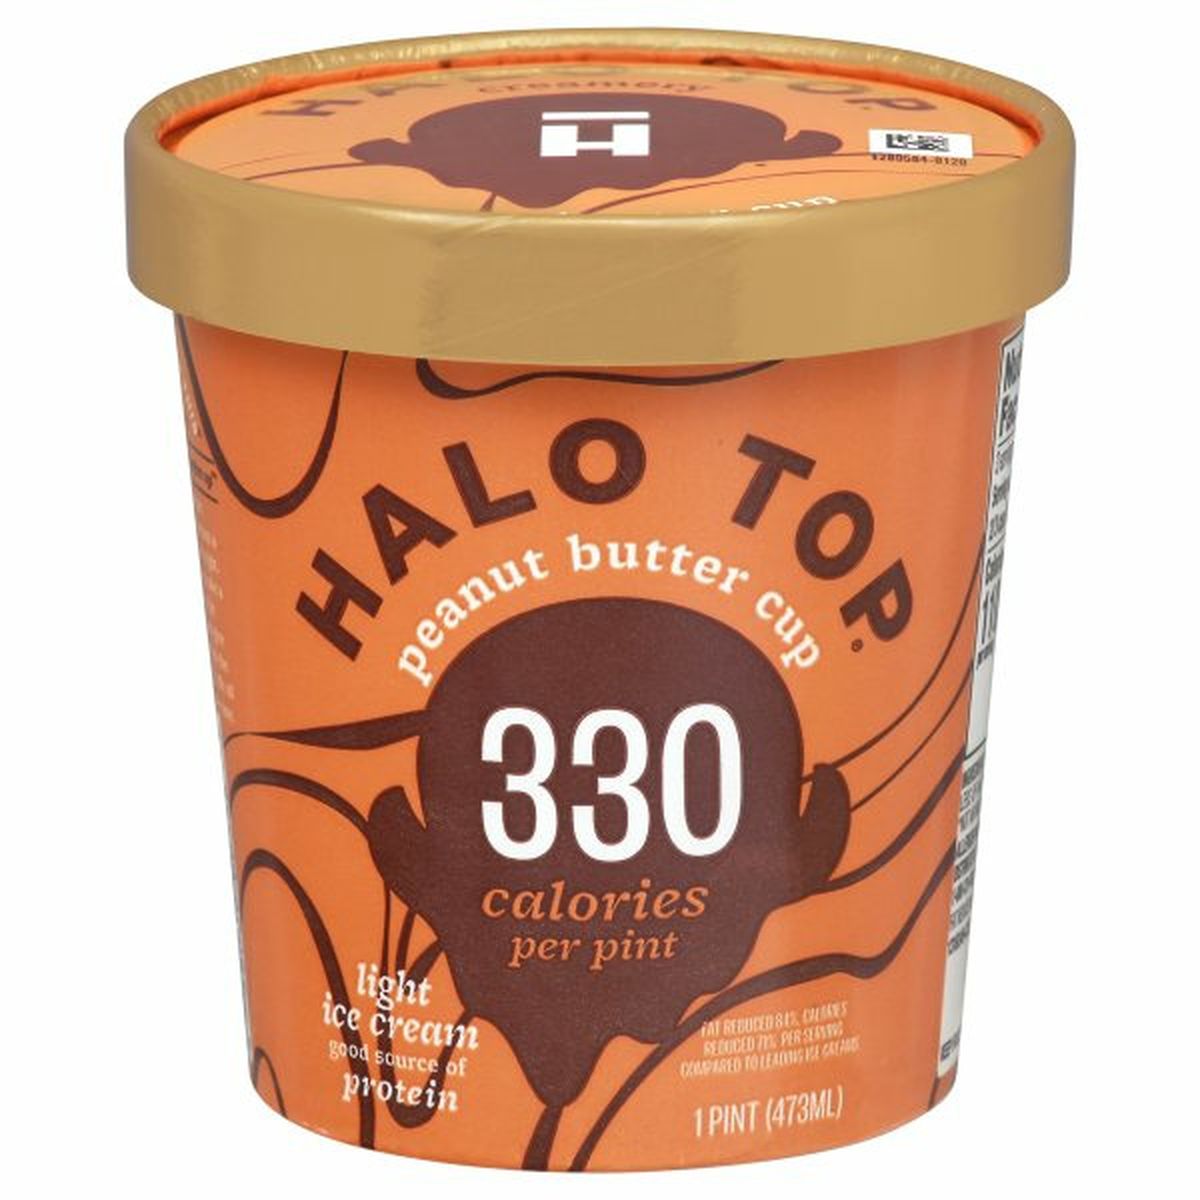 Calories in Halo Top Ice Cream, Light, Peanut Butter Cup